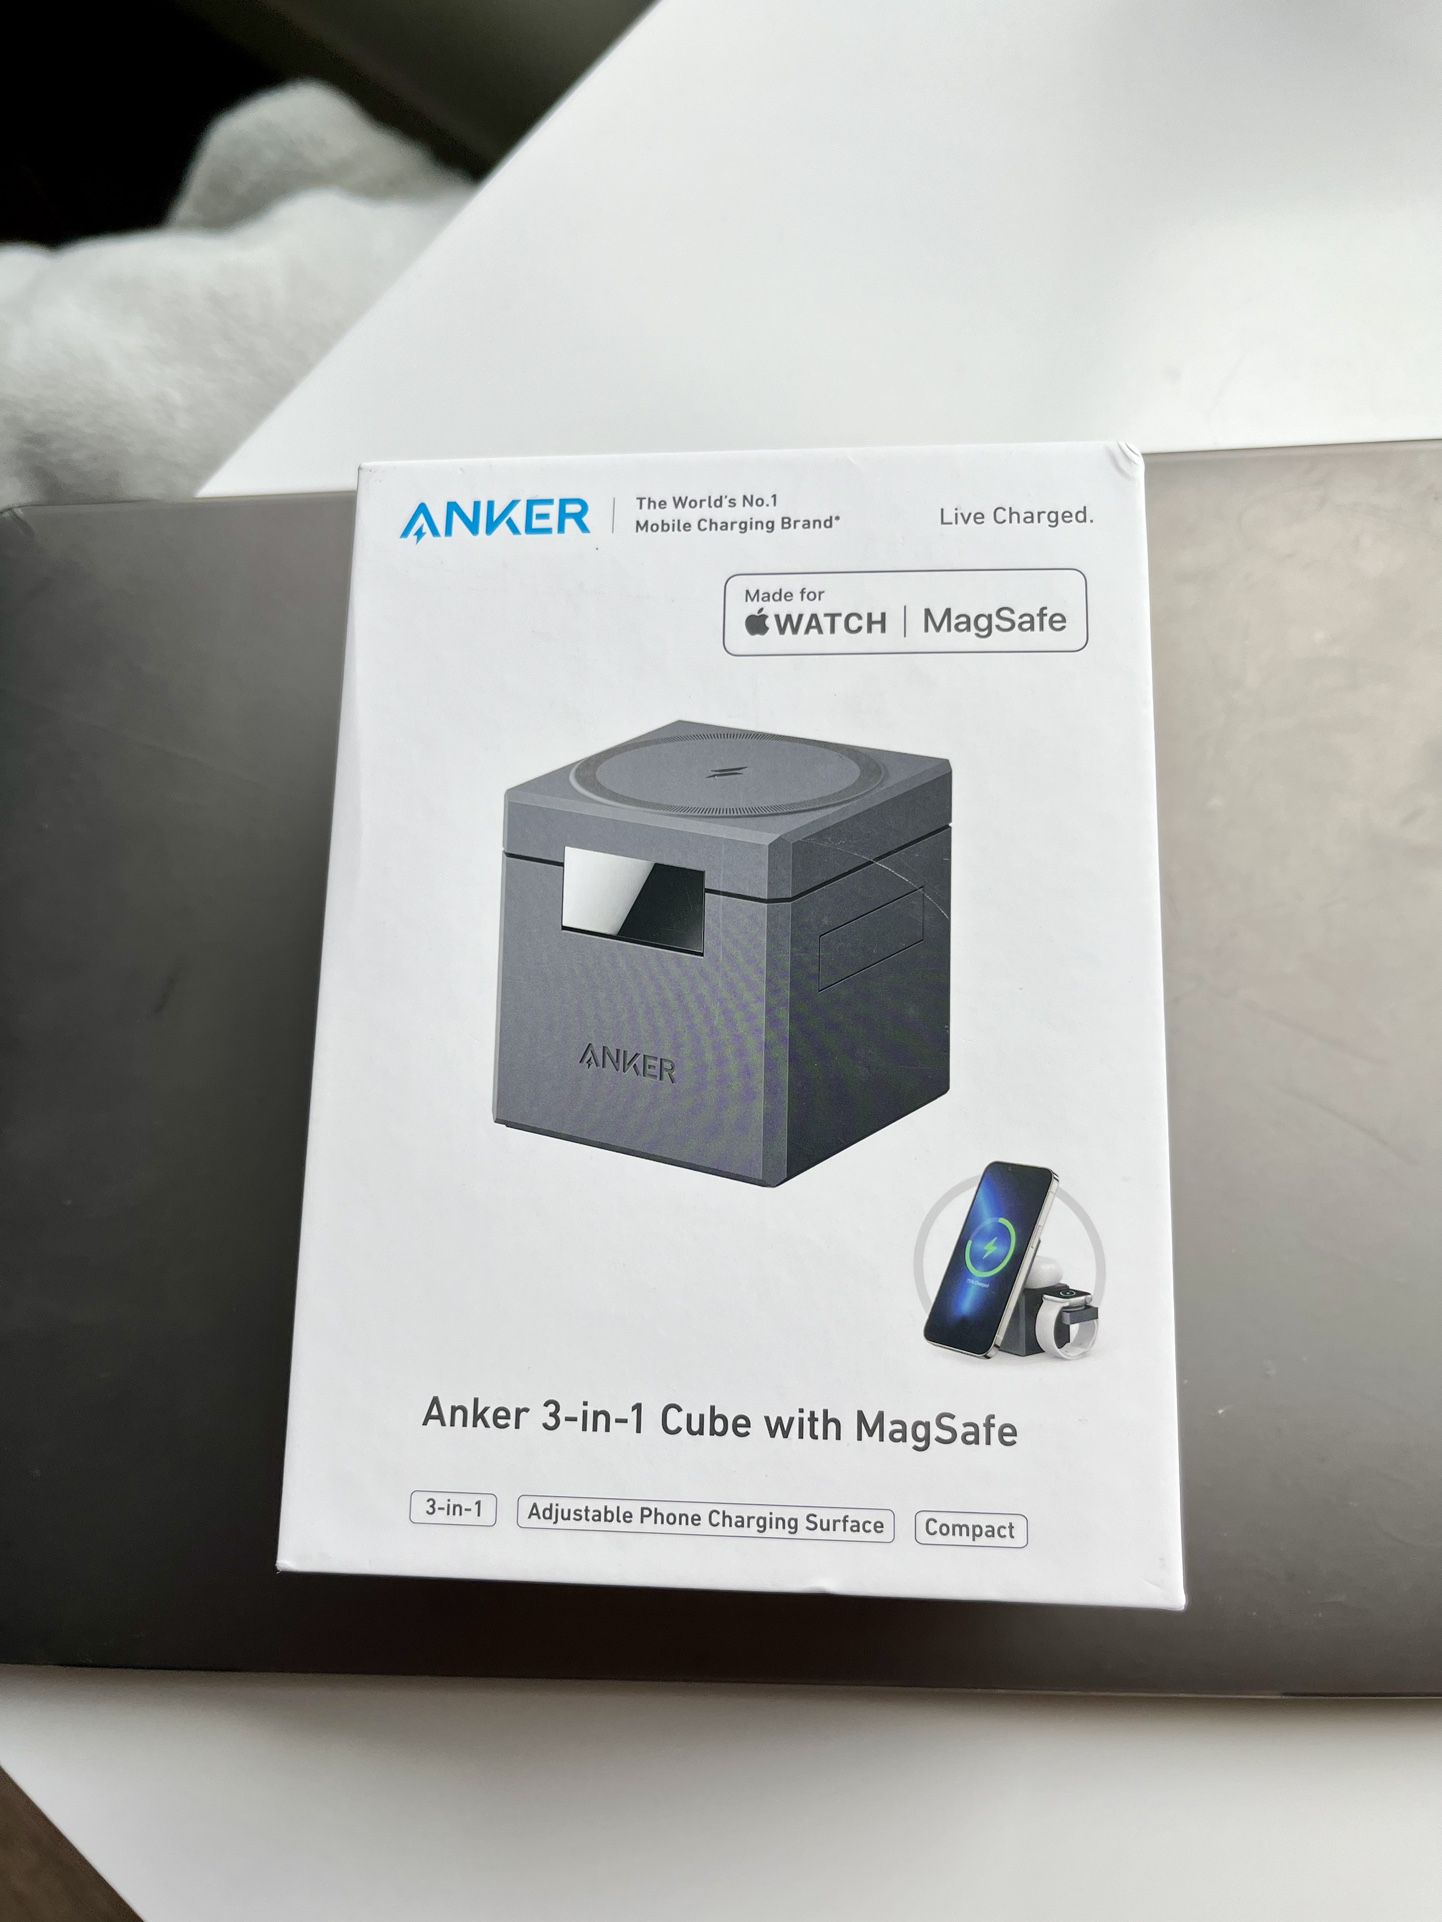 New Unopened Anker 3-in-1 Cube with Magsafe Charging Station!